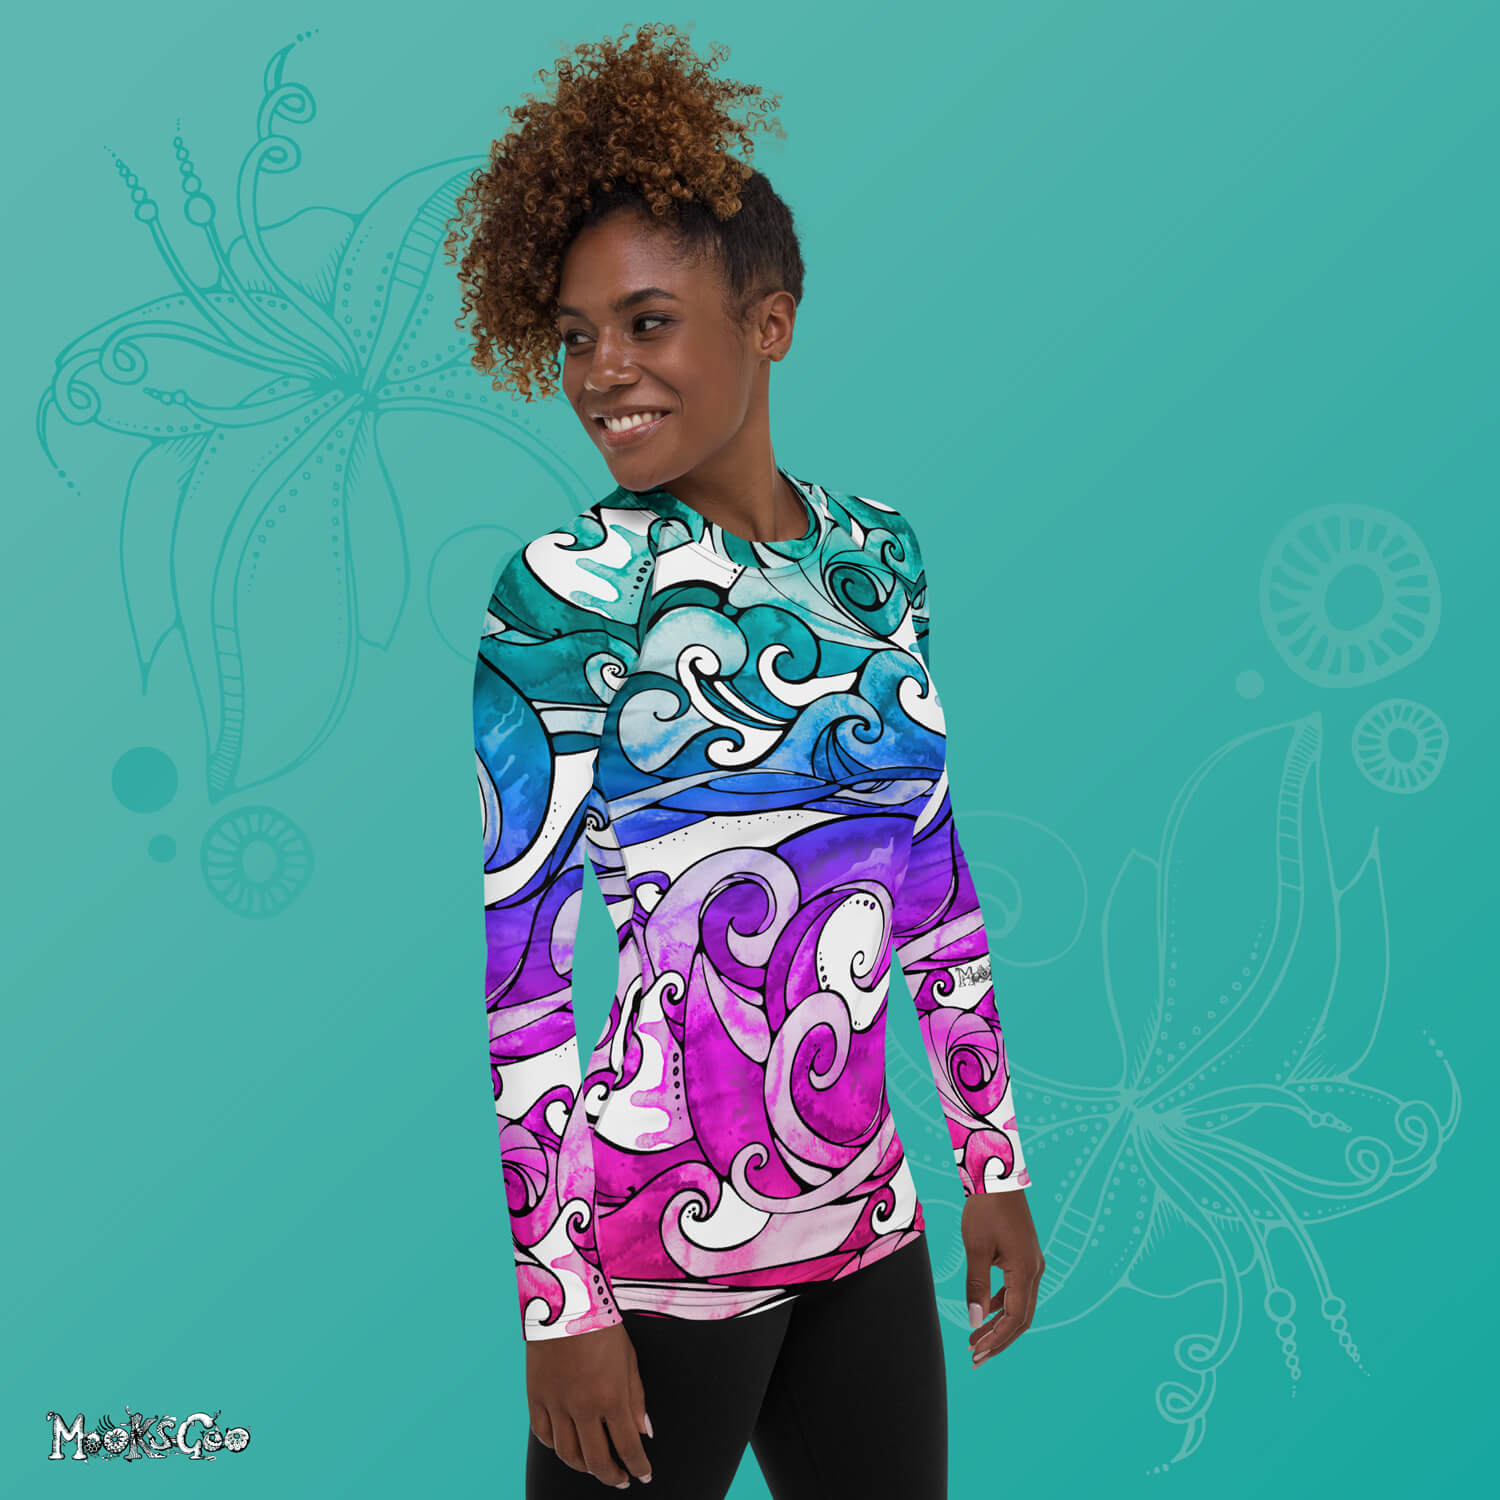 Bright rainbow wave rash guard sports vest for swimming, surfing, working out, yoga, cycling and more, model to the right. Quirky illustrated wave pattern designed by MooksGoo.